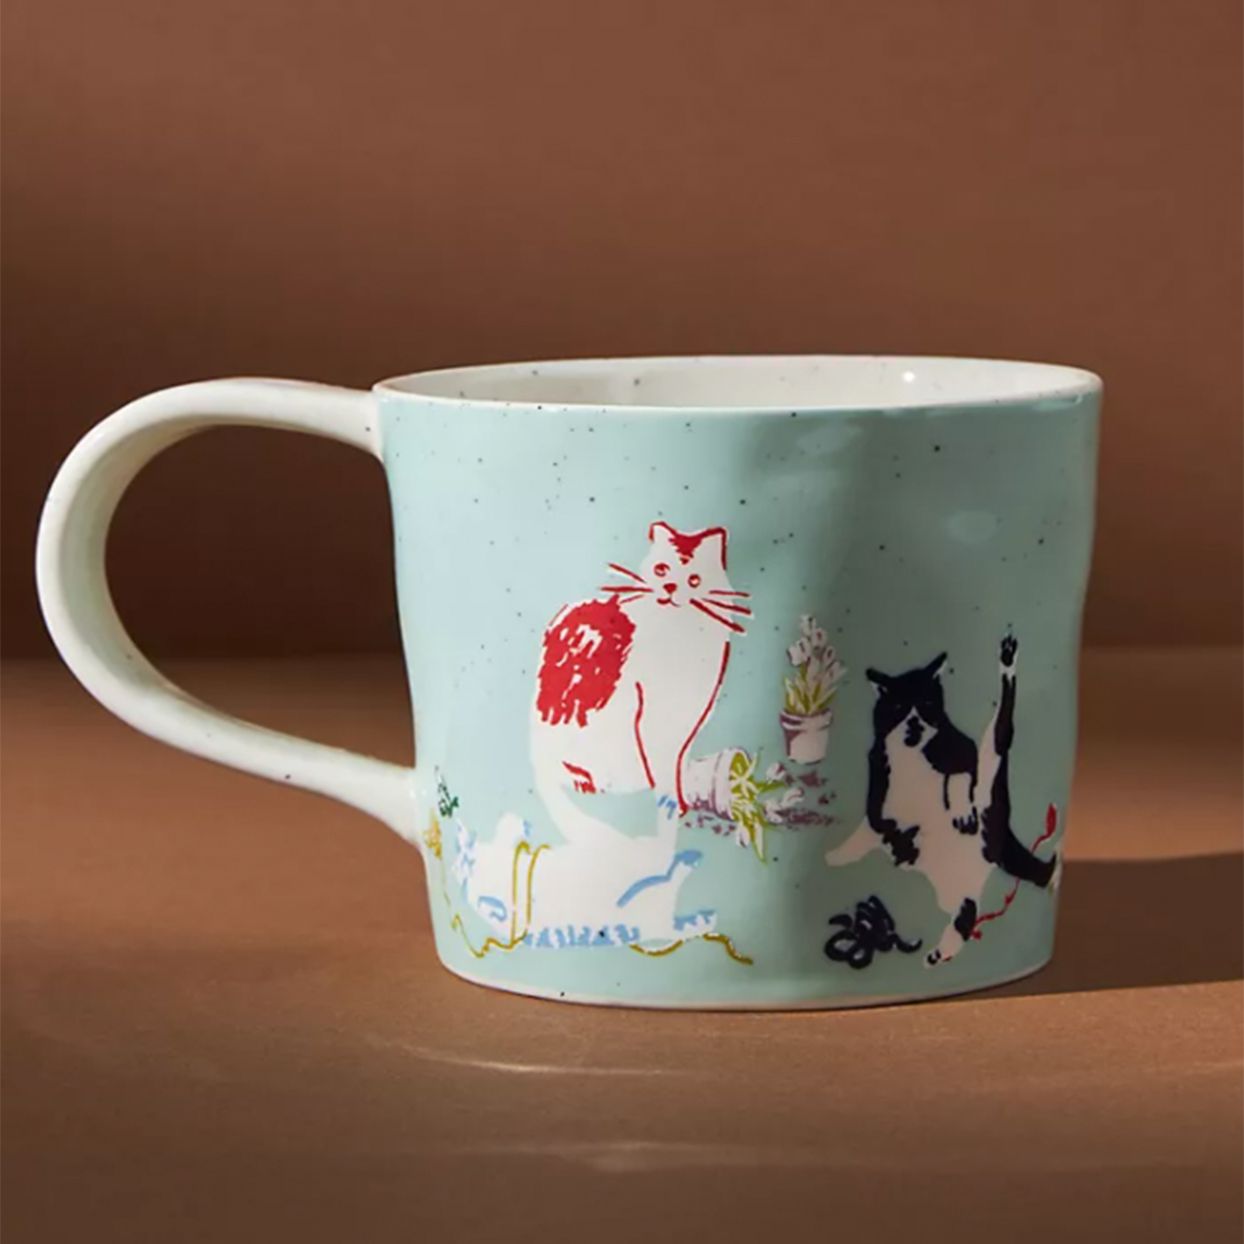 Cat Breeds - High Quality Coffee Tea Mug Types of Cat They're all C*nts 